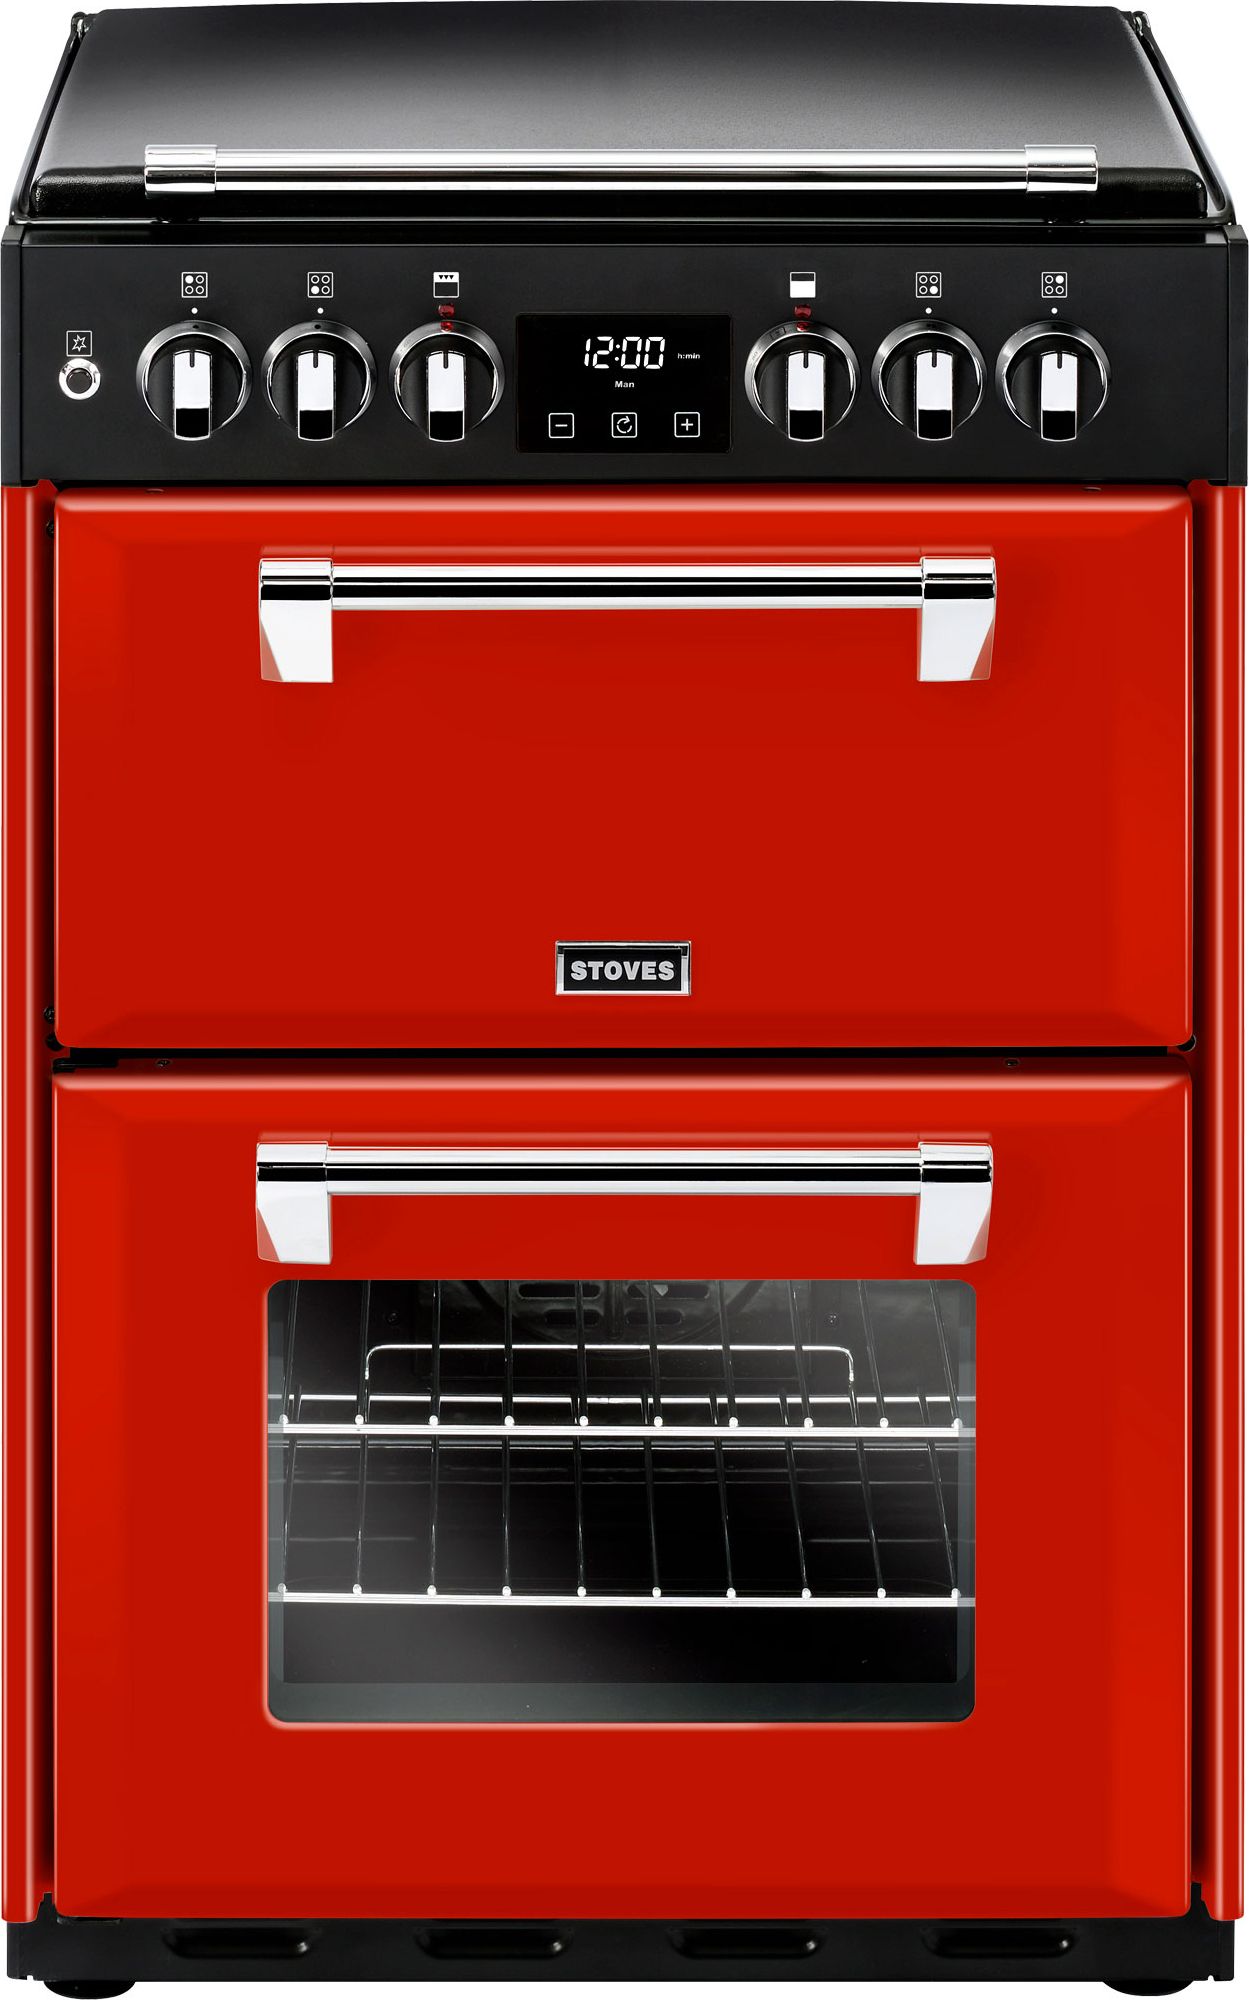 Stoves Richmond600DF 60cm Freestanding Dual Fuel Cooker - Hot Jalapeno - A/A Rated, Red